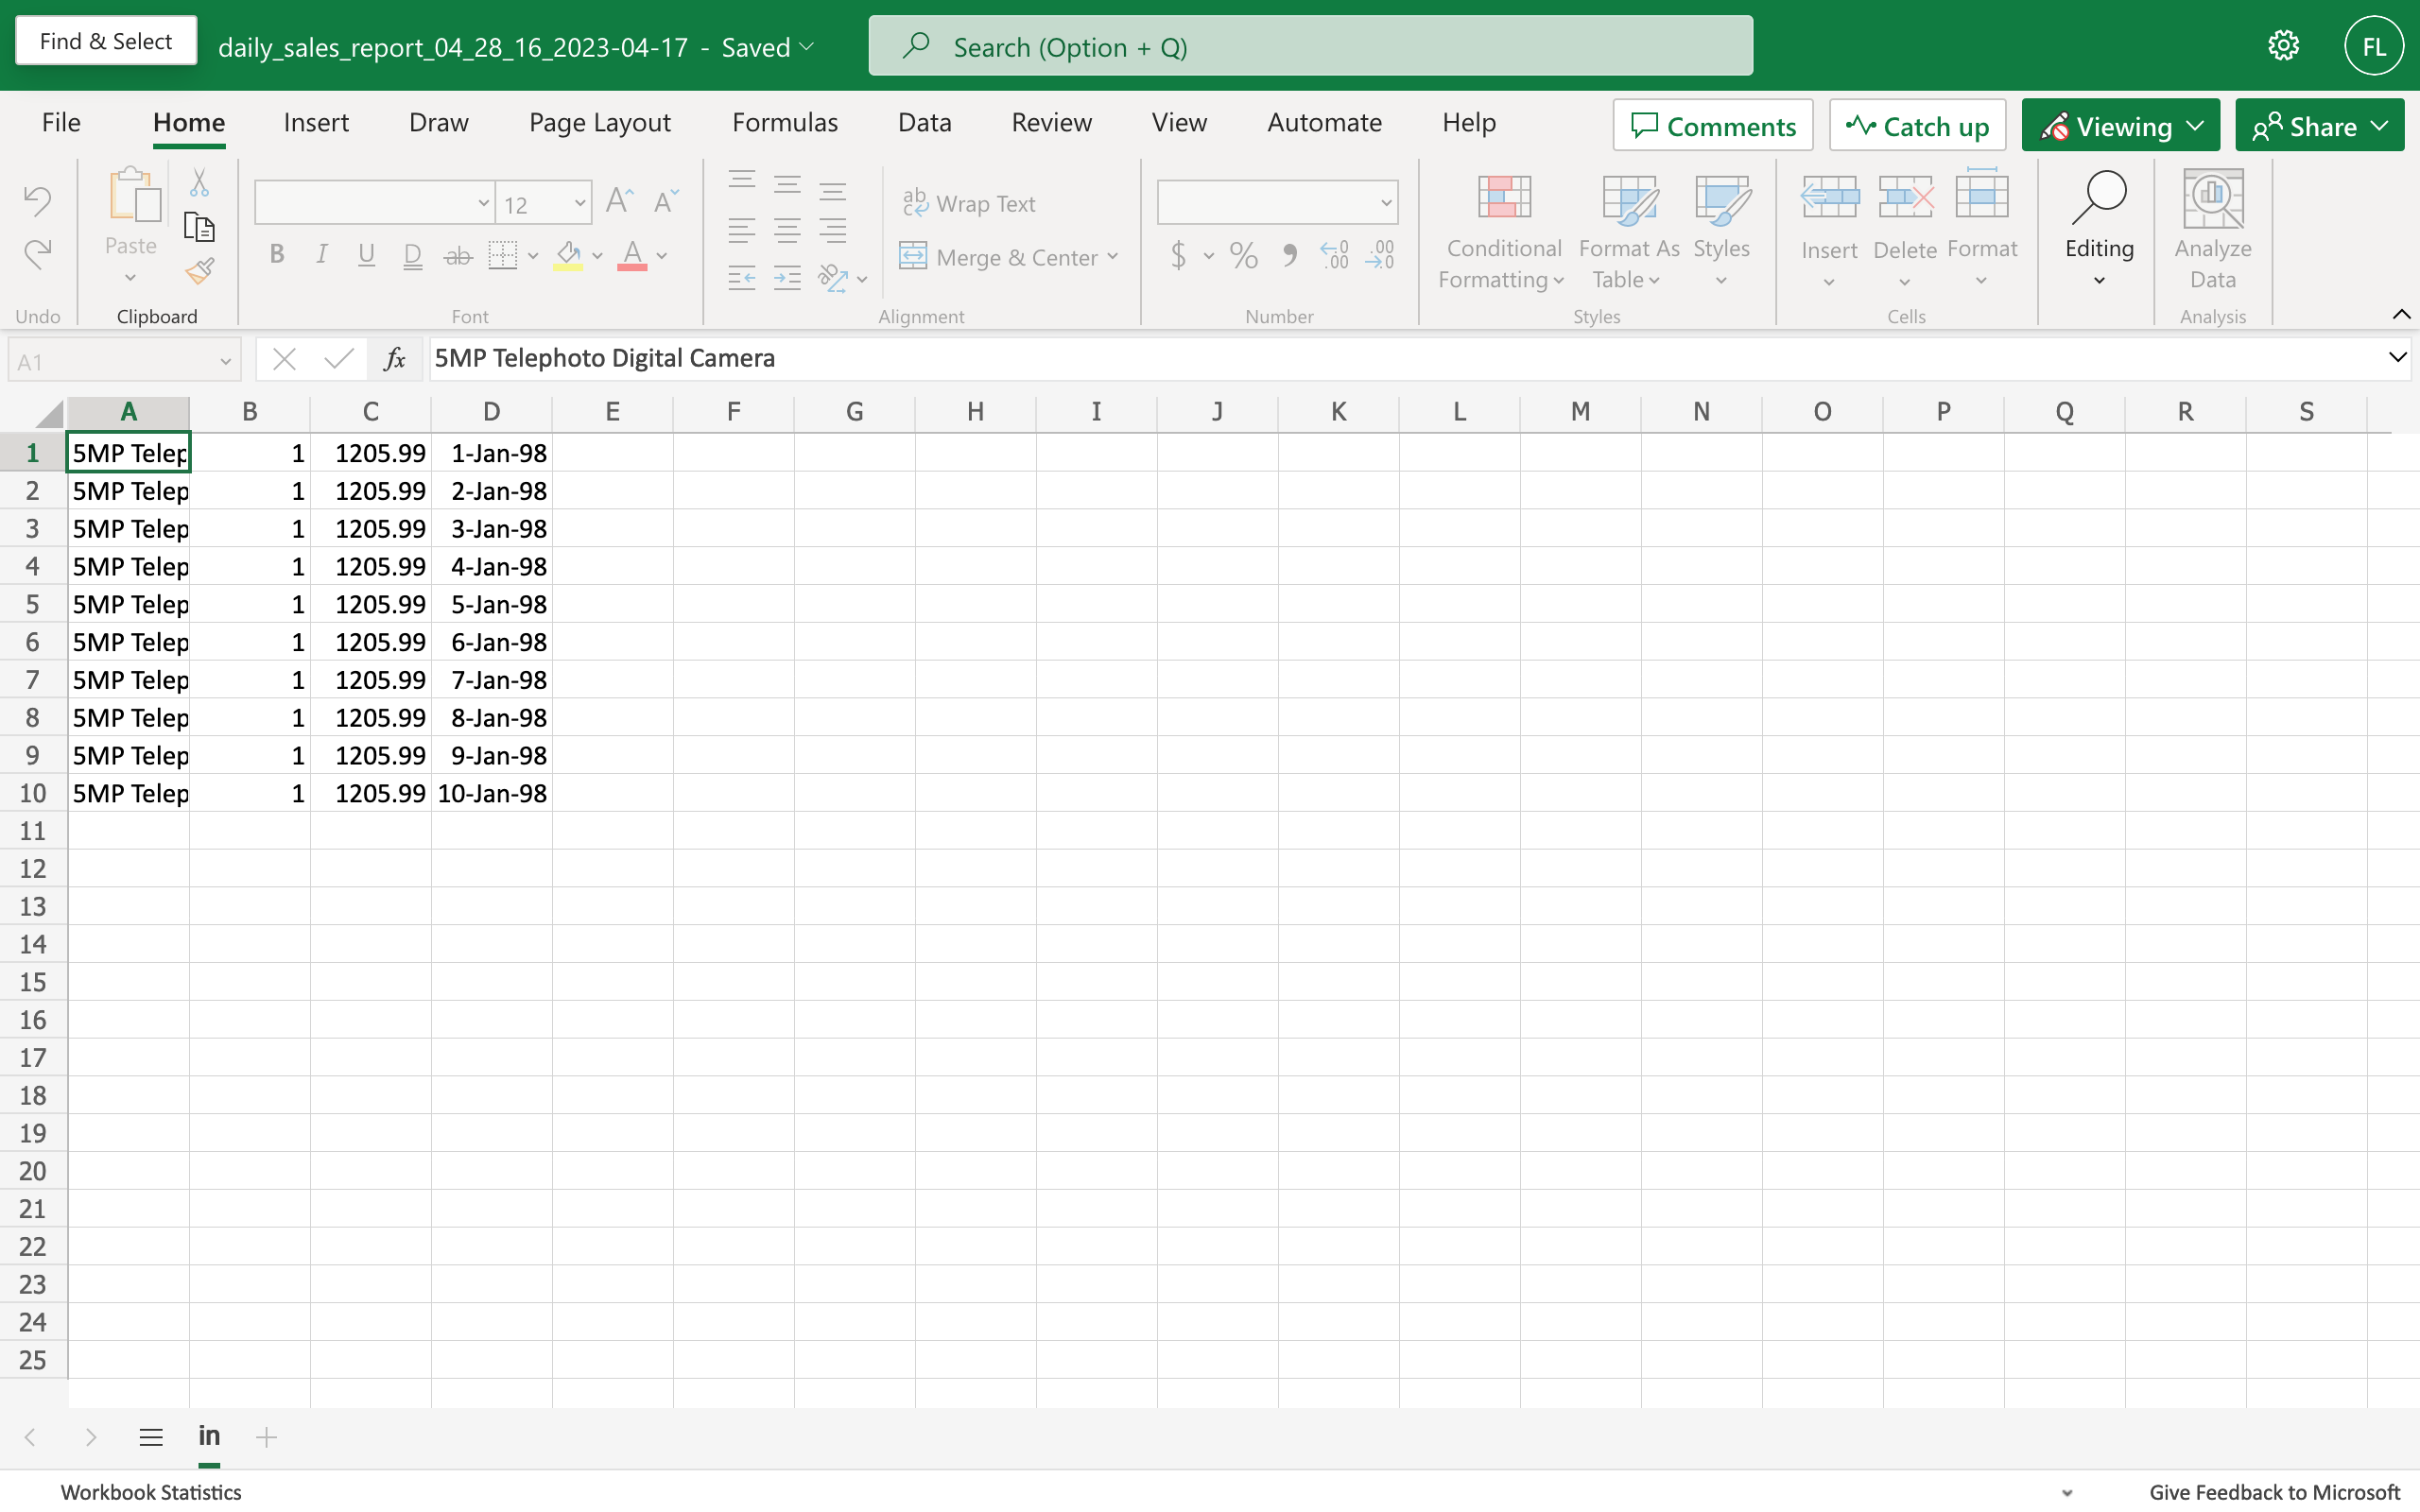 Results from the query in Excel.